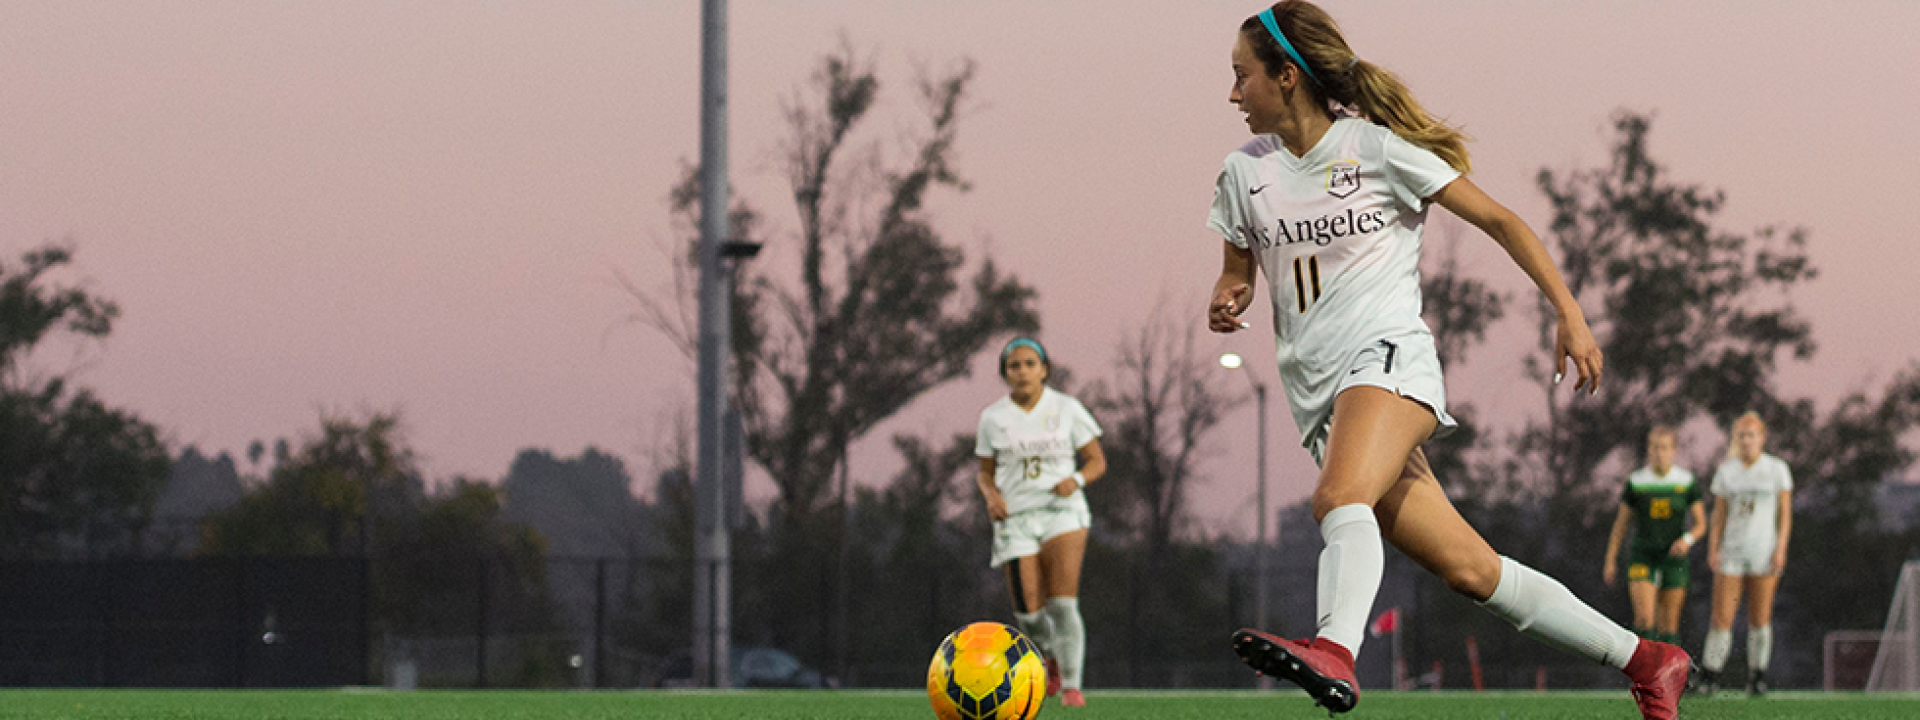 Image of a member of the  women's soccer team on the pitch at dusk, pink sky behind her. 